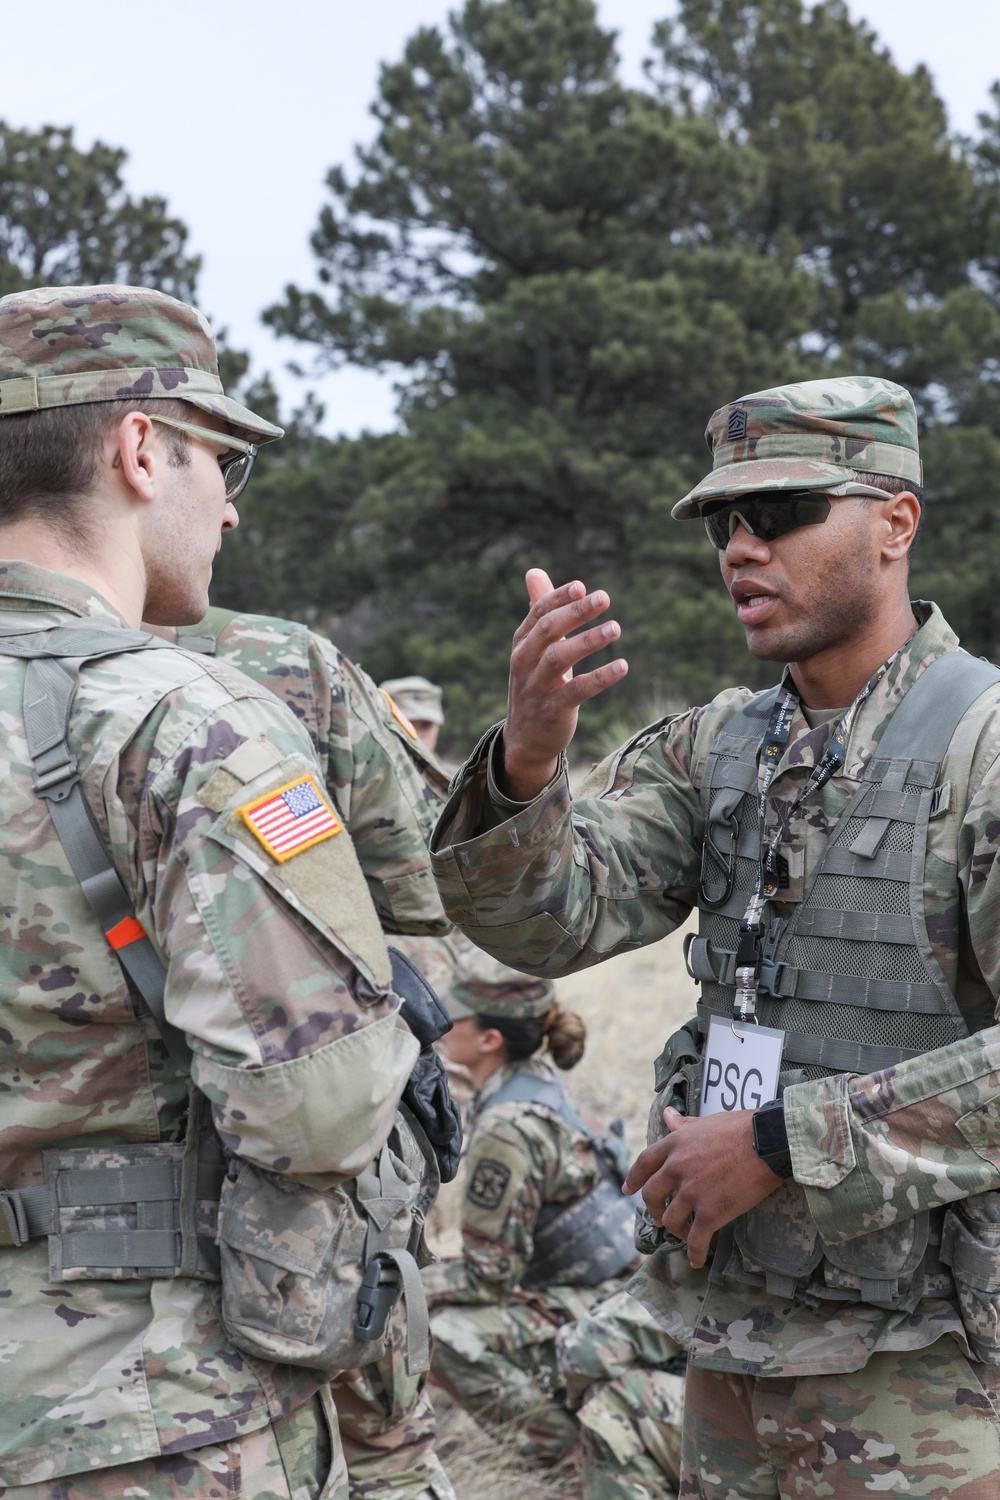 Seeking greatness: Soldier turned cadet yearns for more